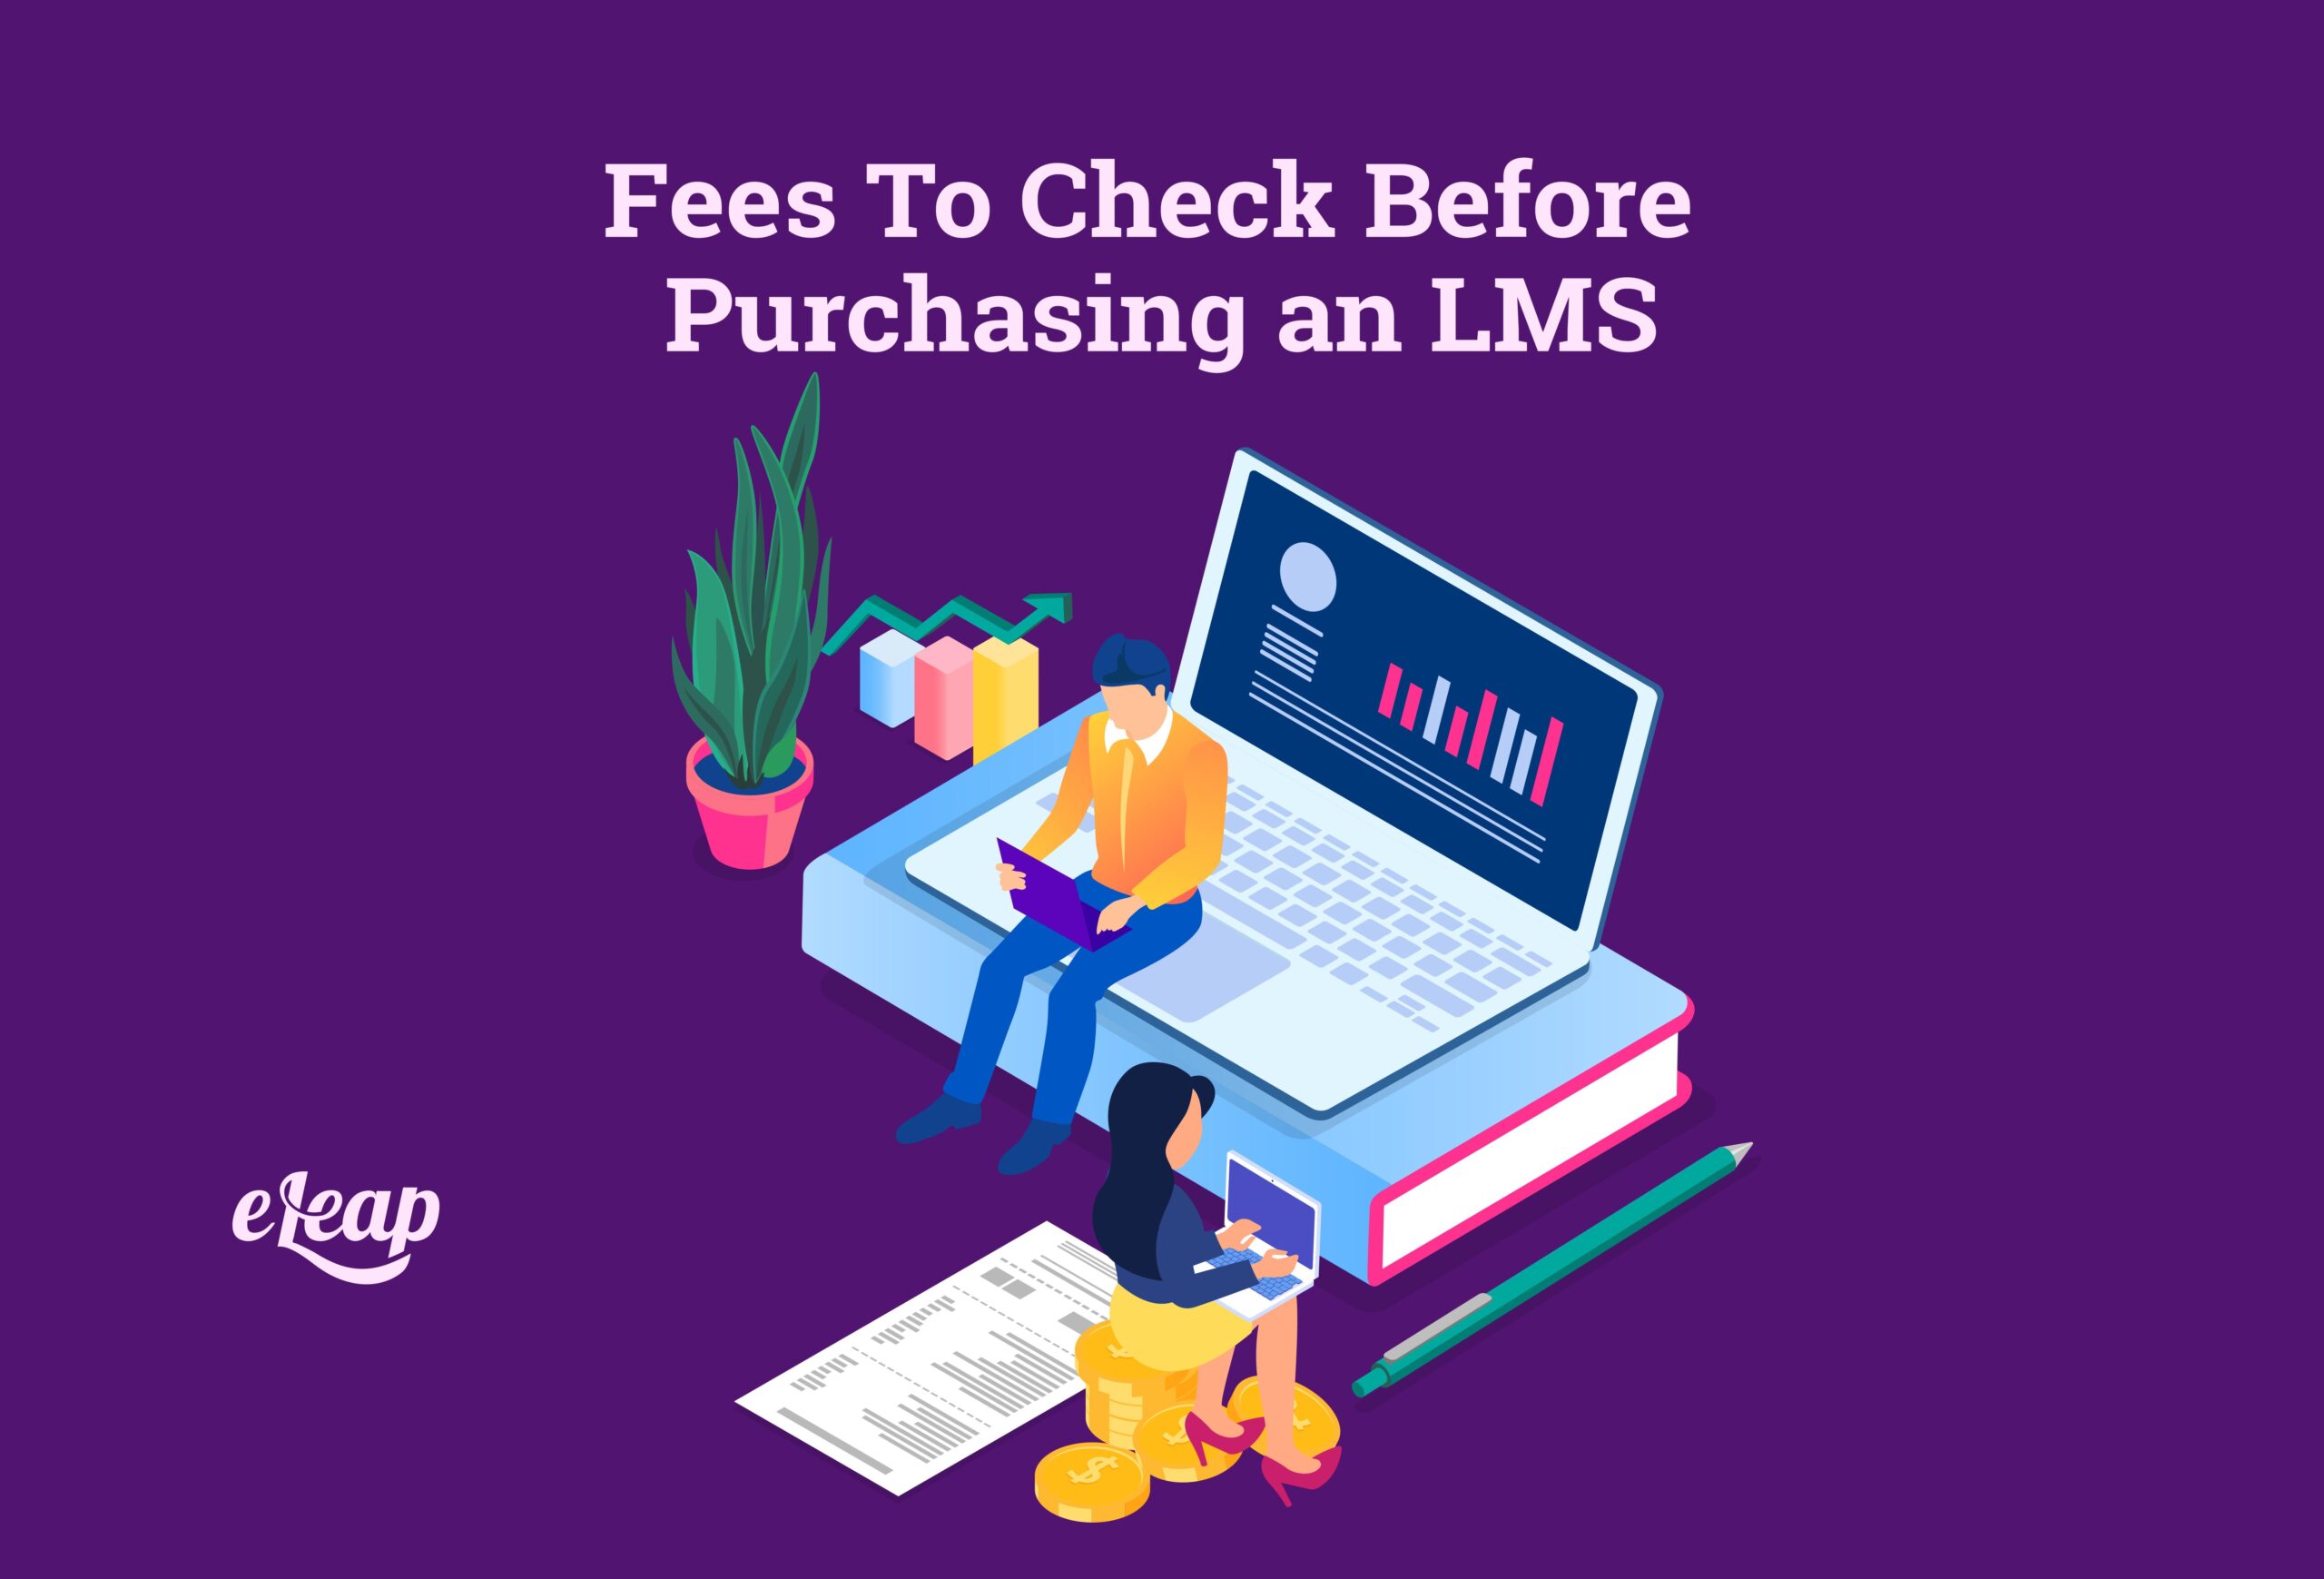 Fees To Check Before Purchasing an LMS